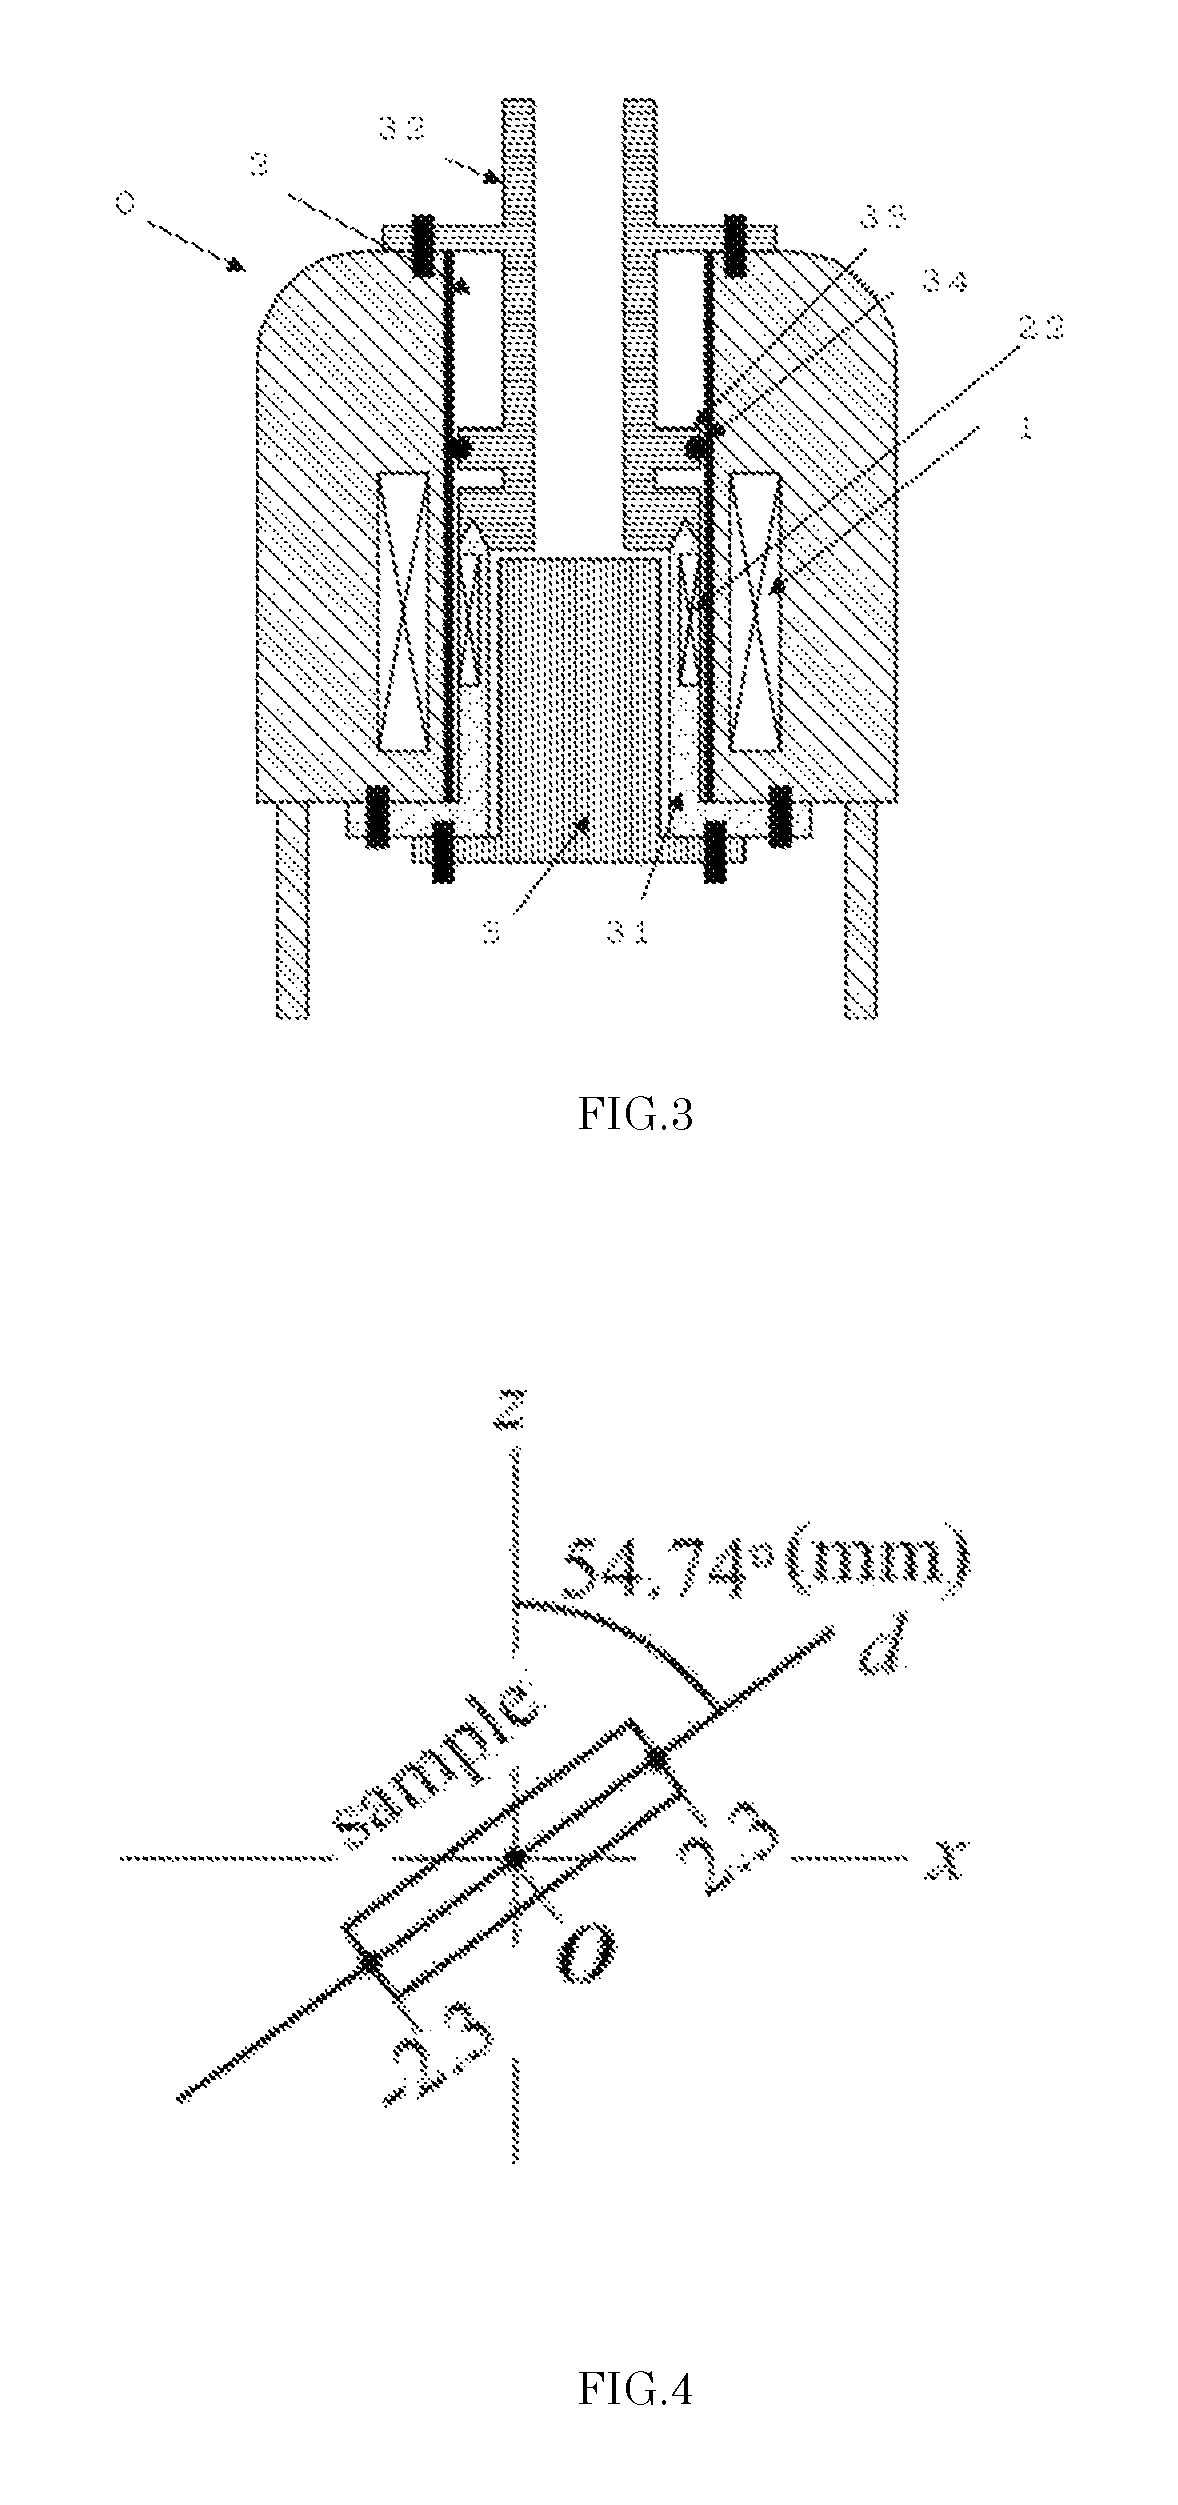 Coil assembly for accurate adjustment of magic angle in solid-state NMR apparatus and method of adjusting magic angle using such coil assembly